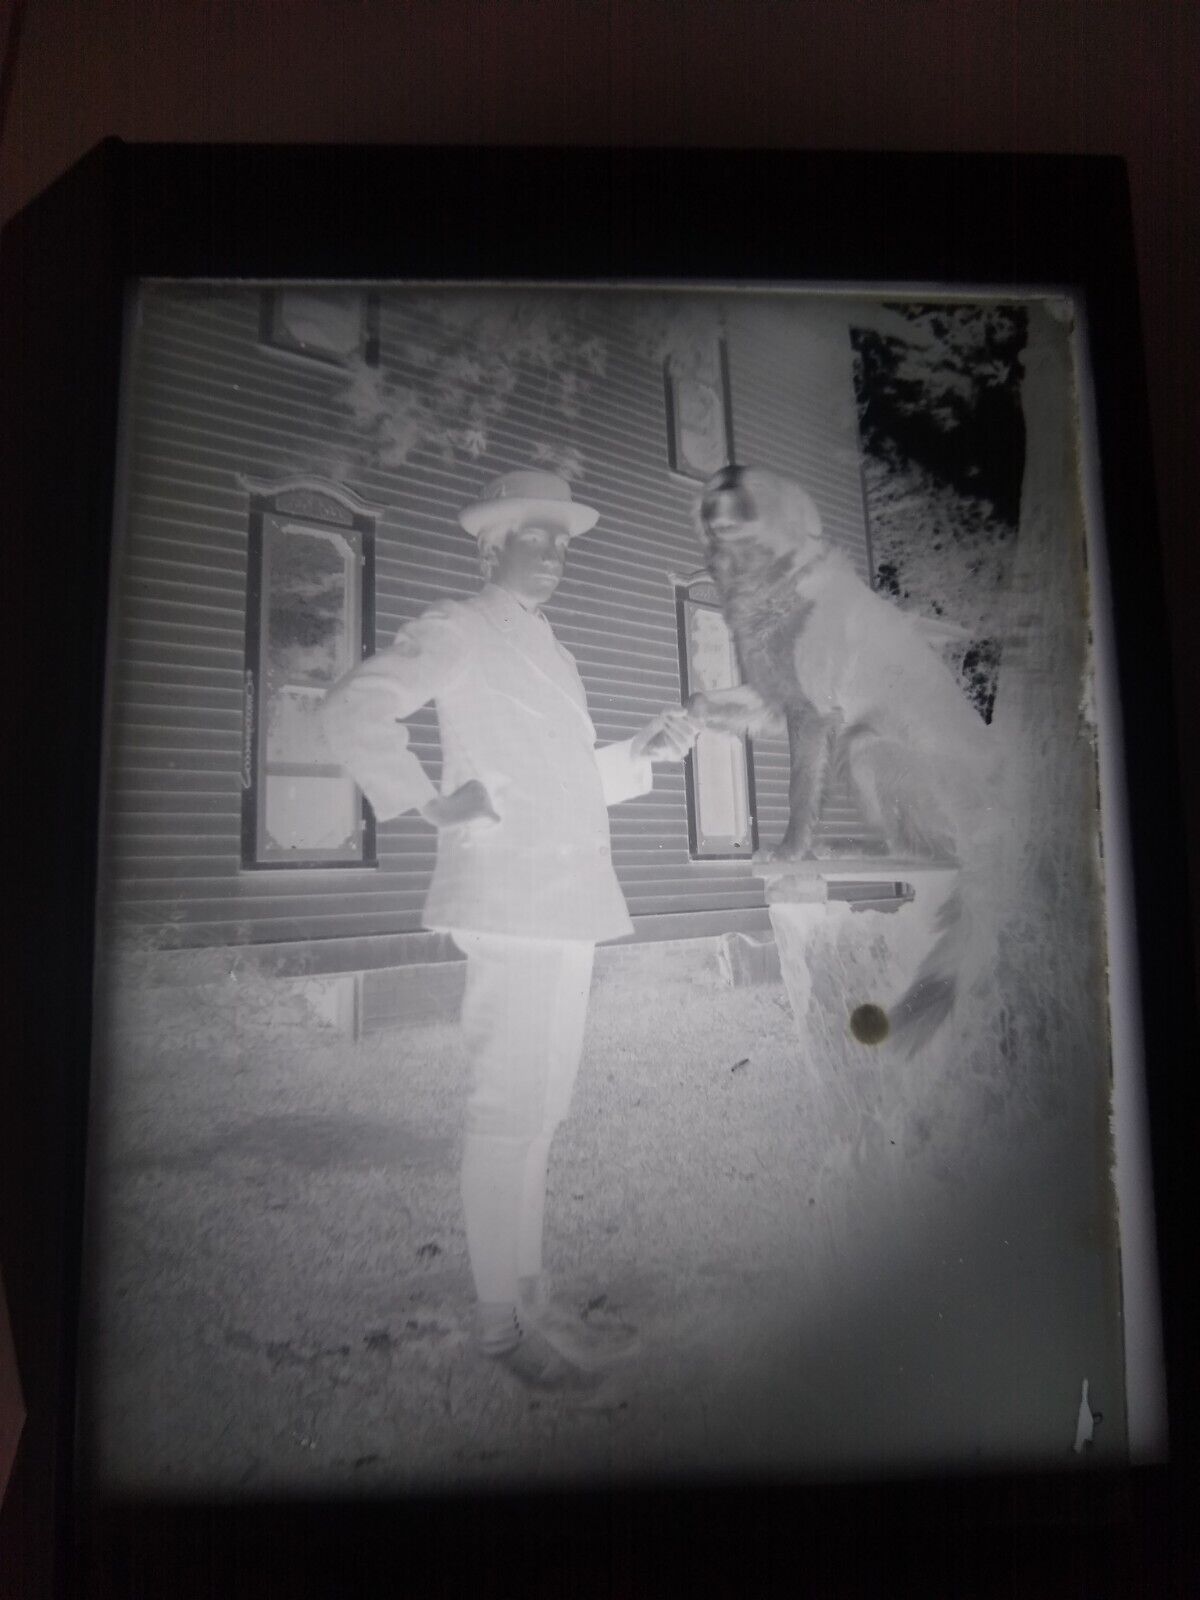 Antique glass photo negative Man shaking hands with dog on a stump retriever